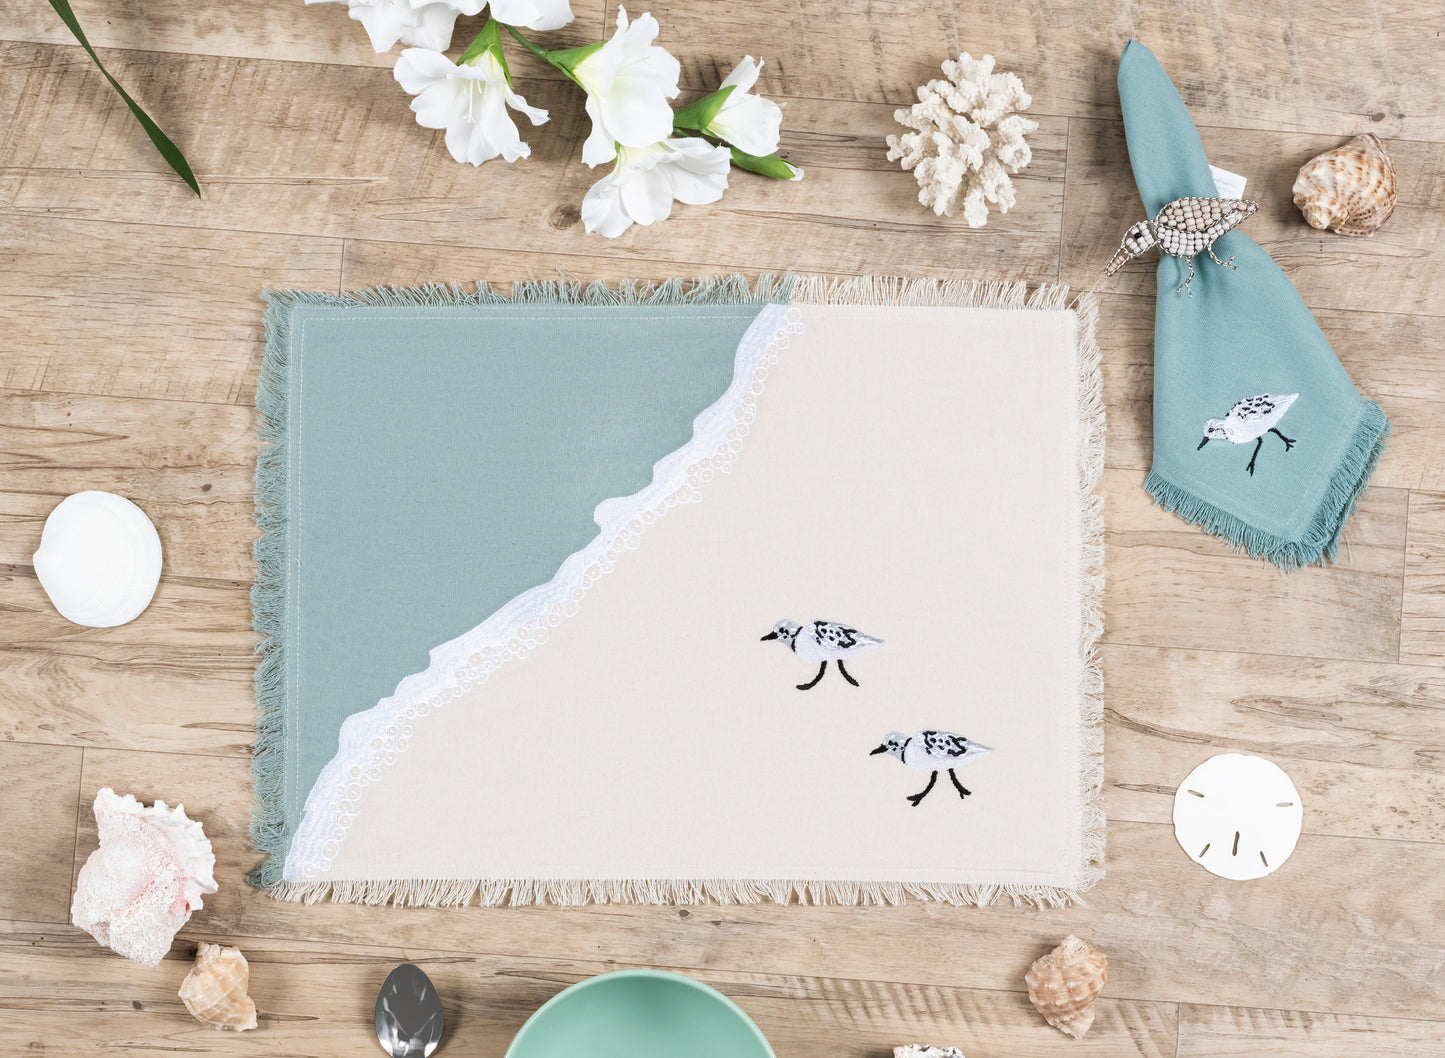 Sandpiper embroidered on coastal blue napkin next to two sandpipers embroidered on a cotton fringed placemat featuring blue waves on sand. Linens are sitting on a wooden table.